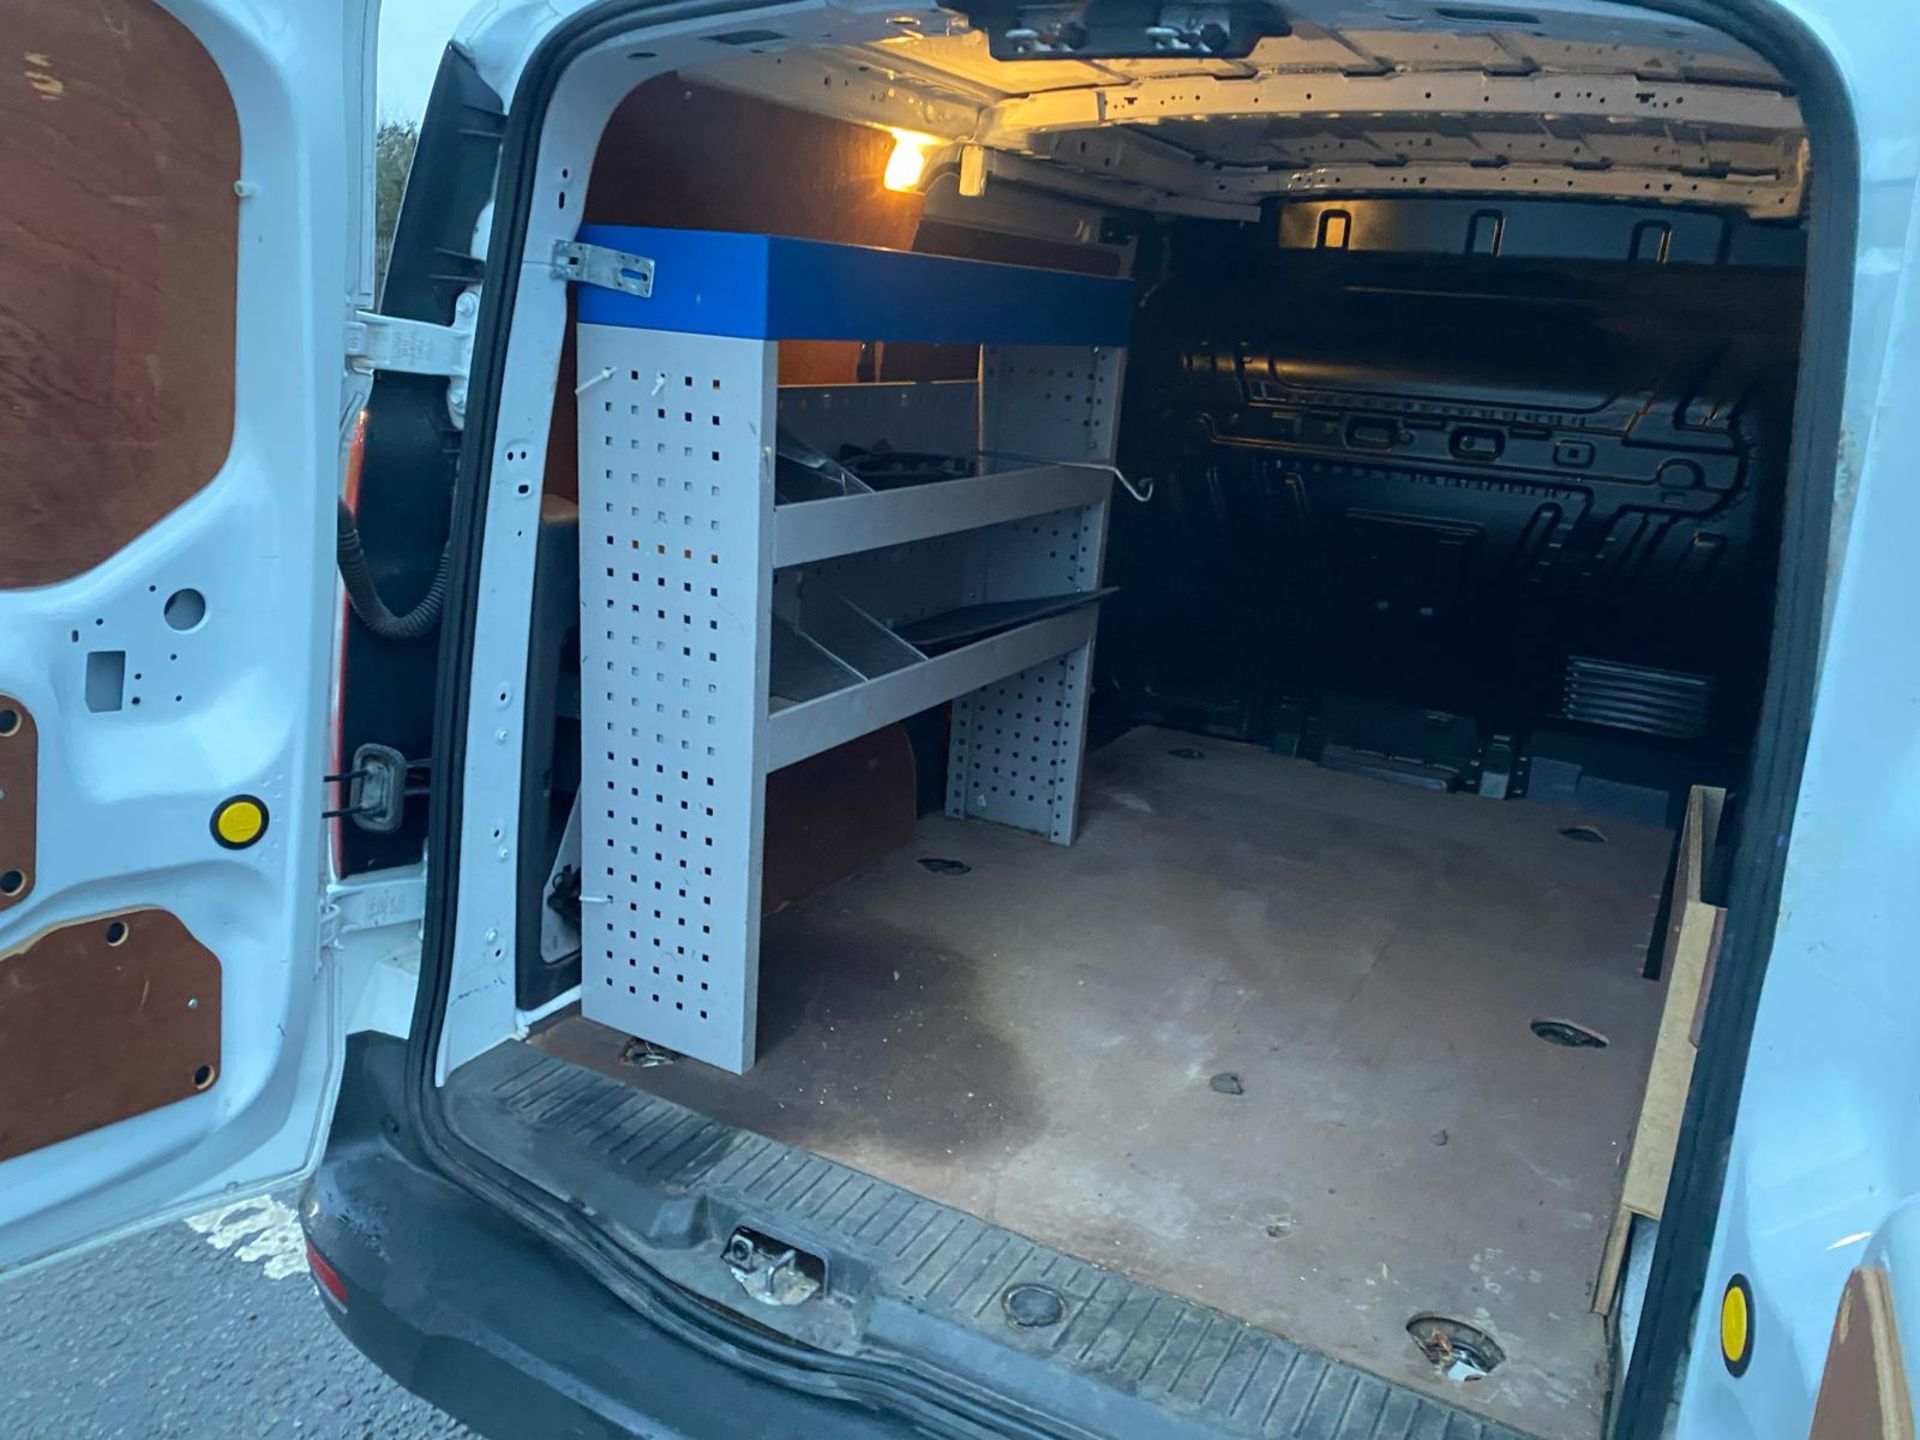 2018 18 FORD TRANSIT CONNECT TREND PAENL VAN - 128K MILES - EURO 6 - 3 SEATS - LWB - ROOF RACK. - Image 10 of 13